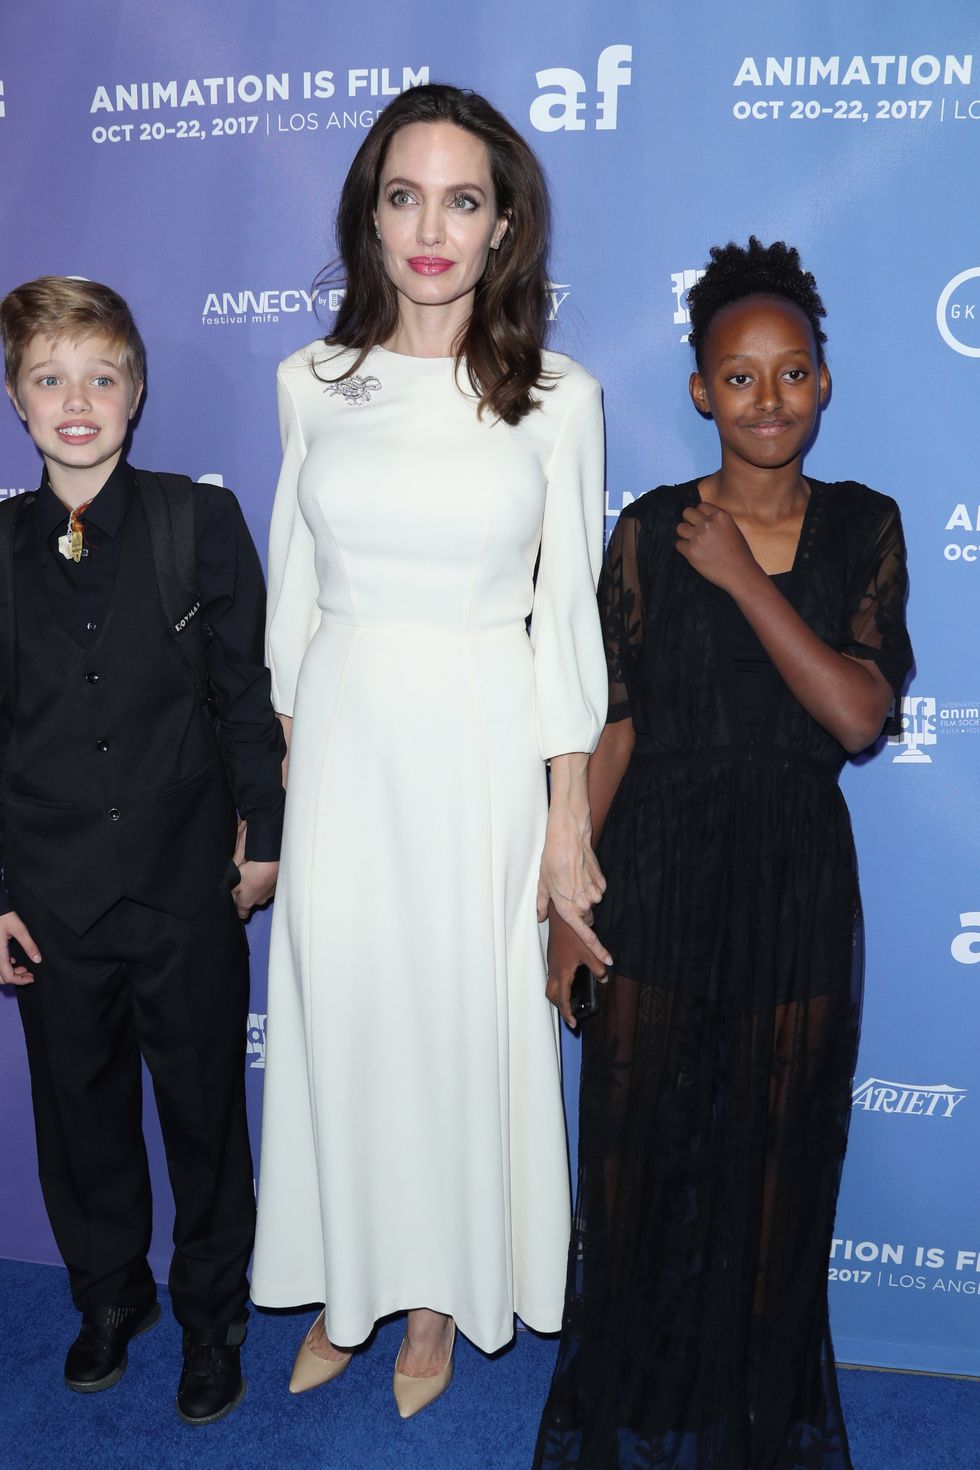 Angelina Jolie with her daughters on the red carpet